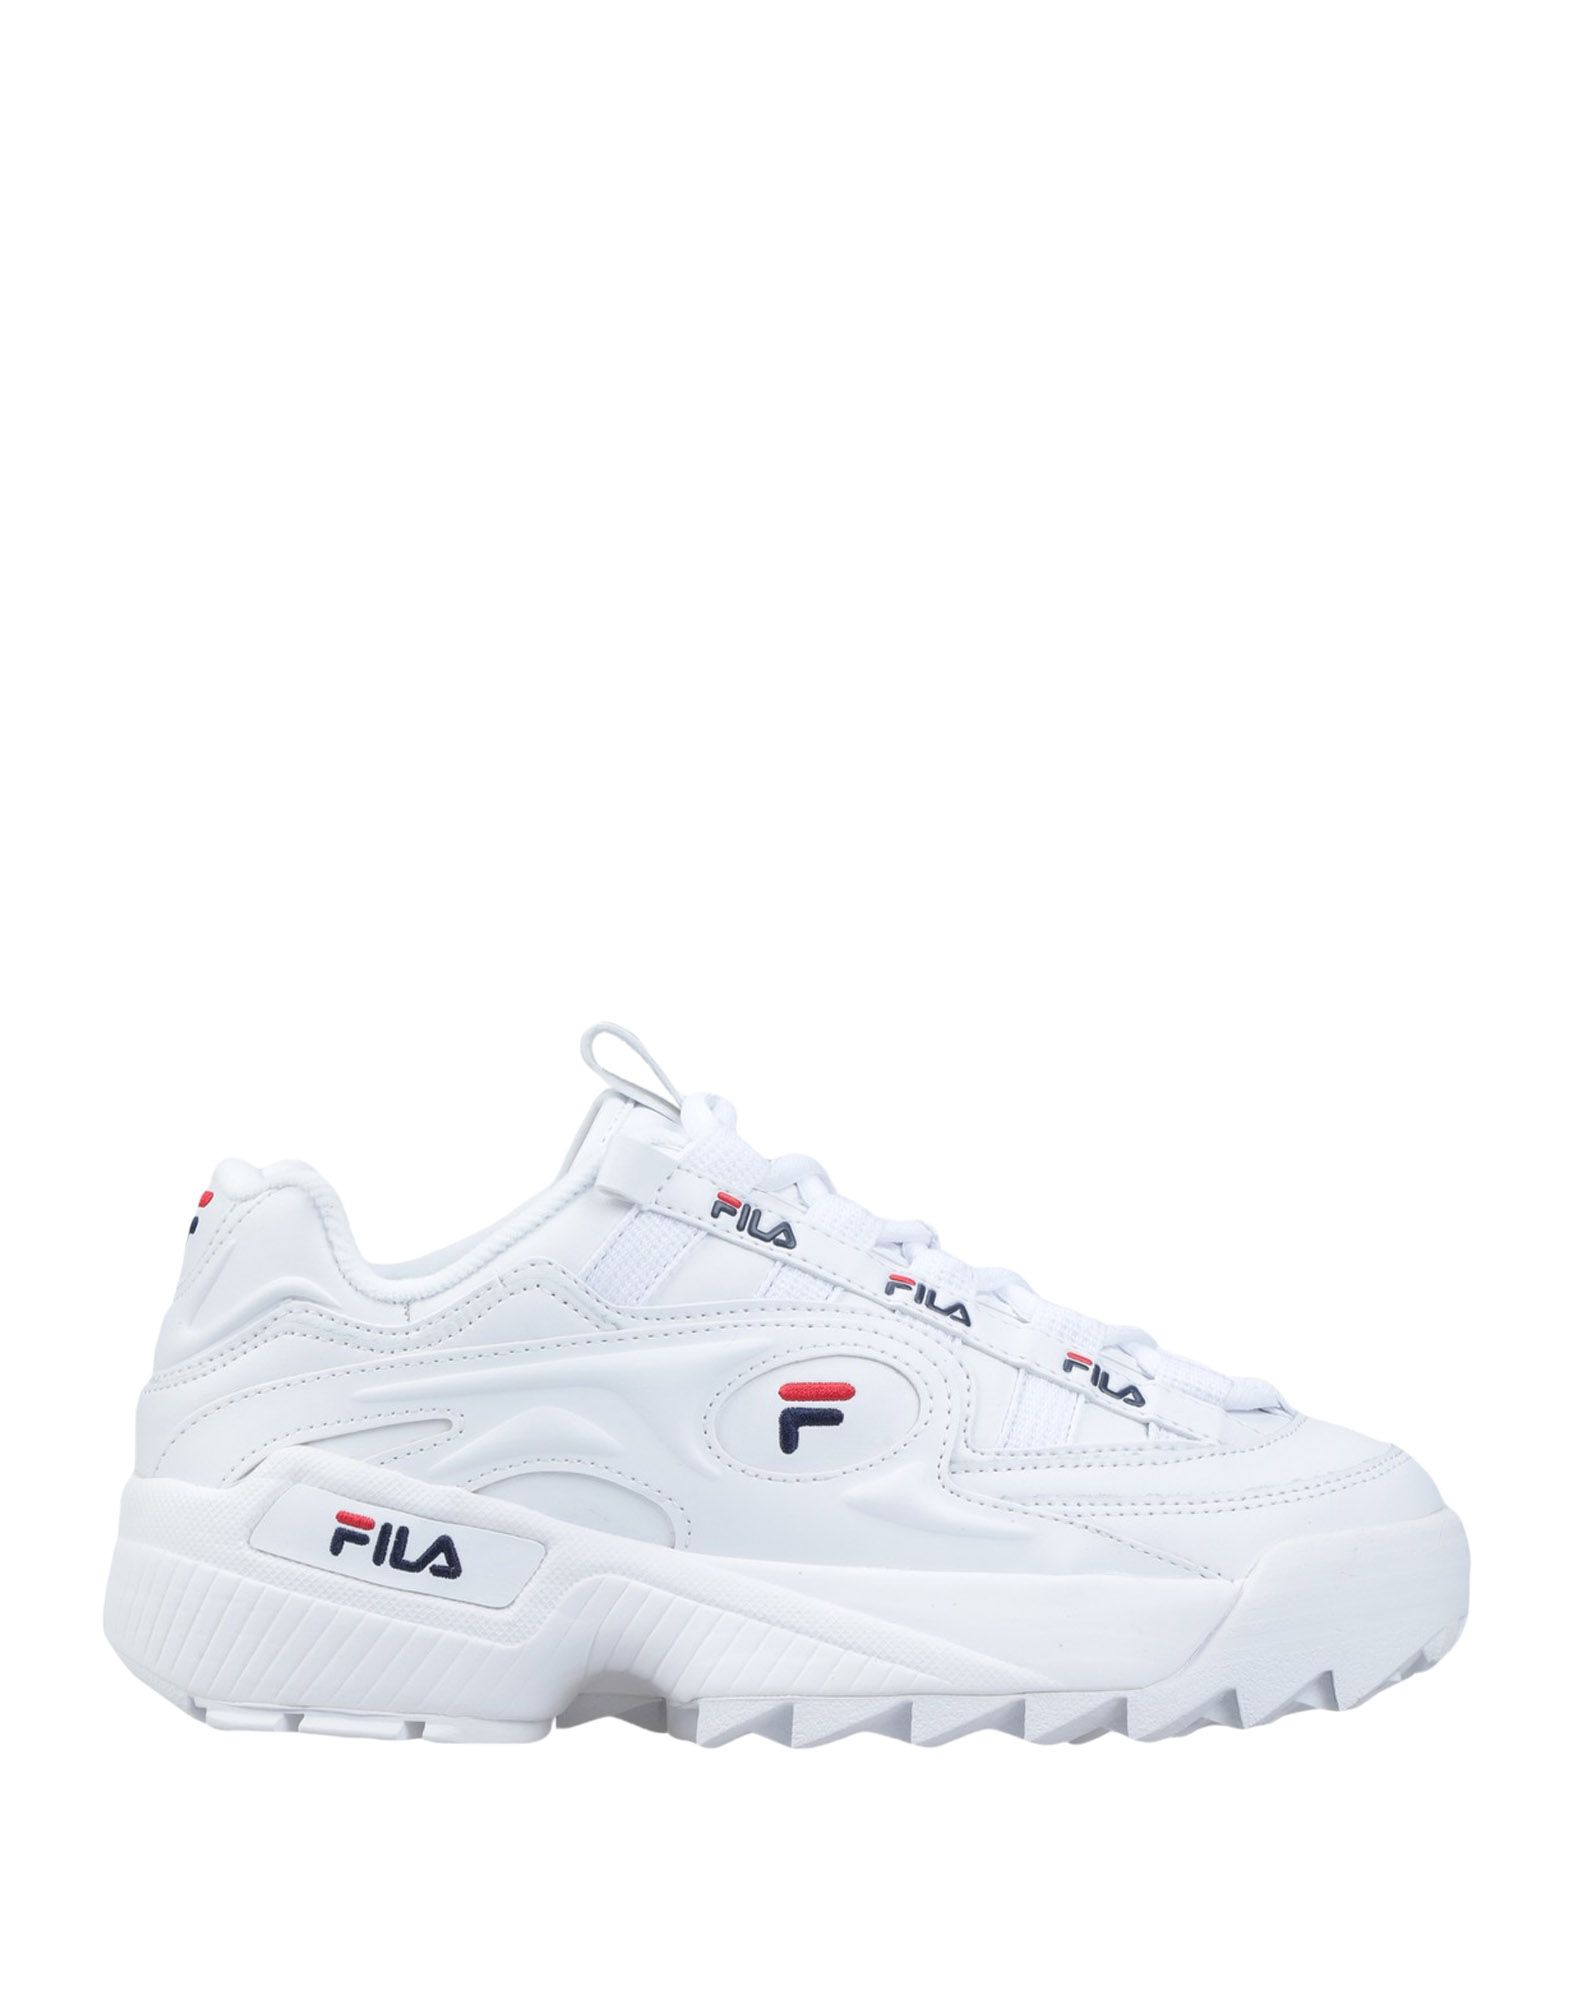 Shop Fila D-formation Woman Sneakers White Size 6 Soft Leather